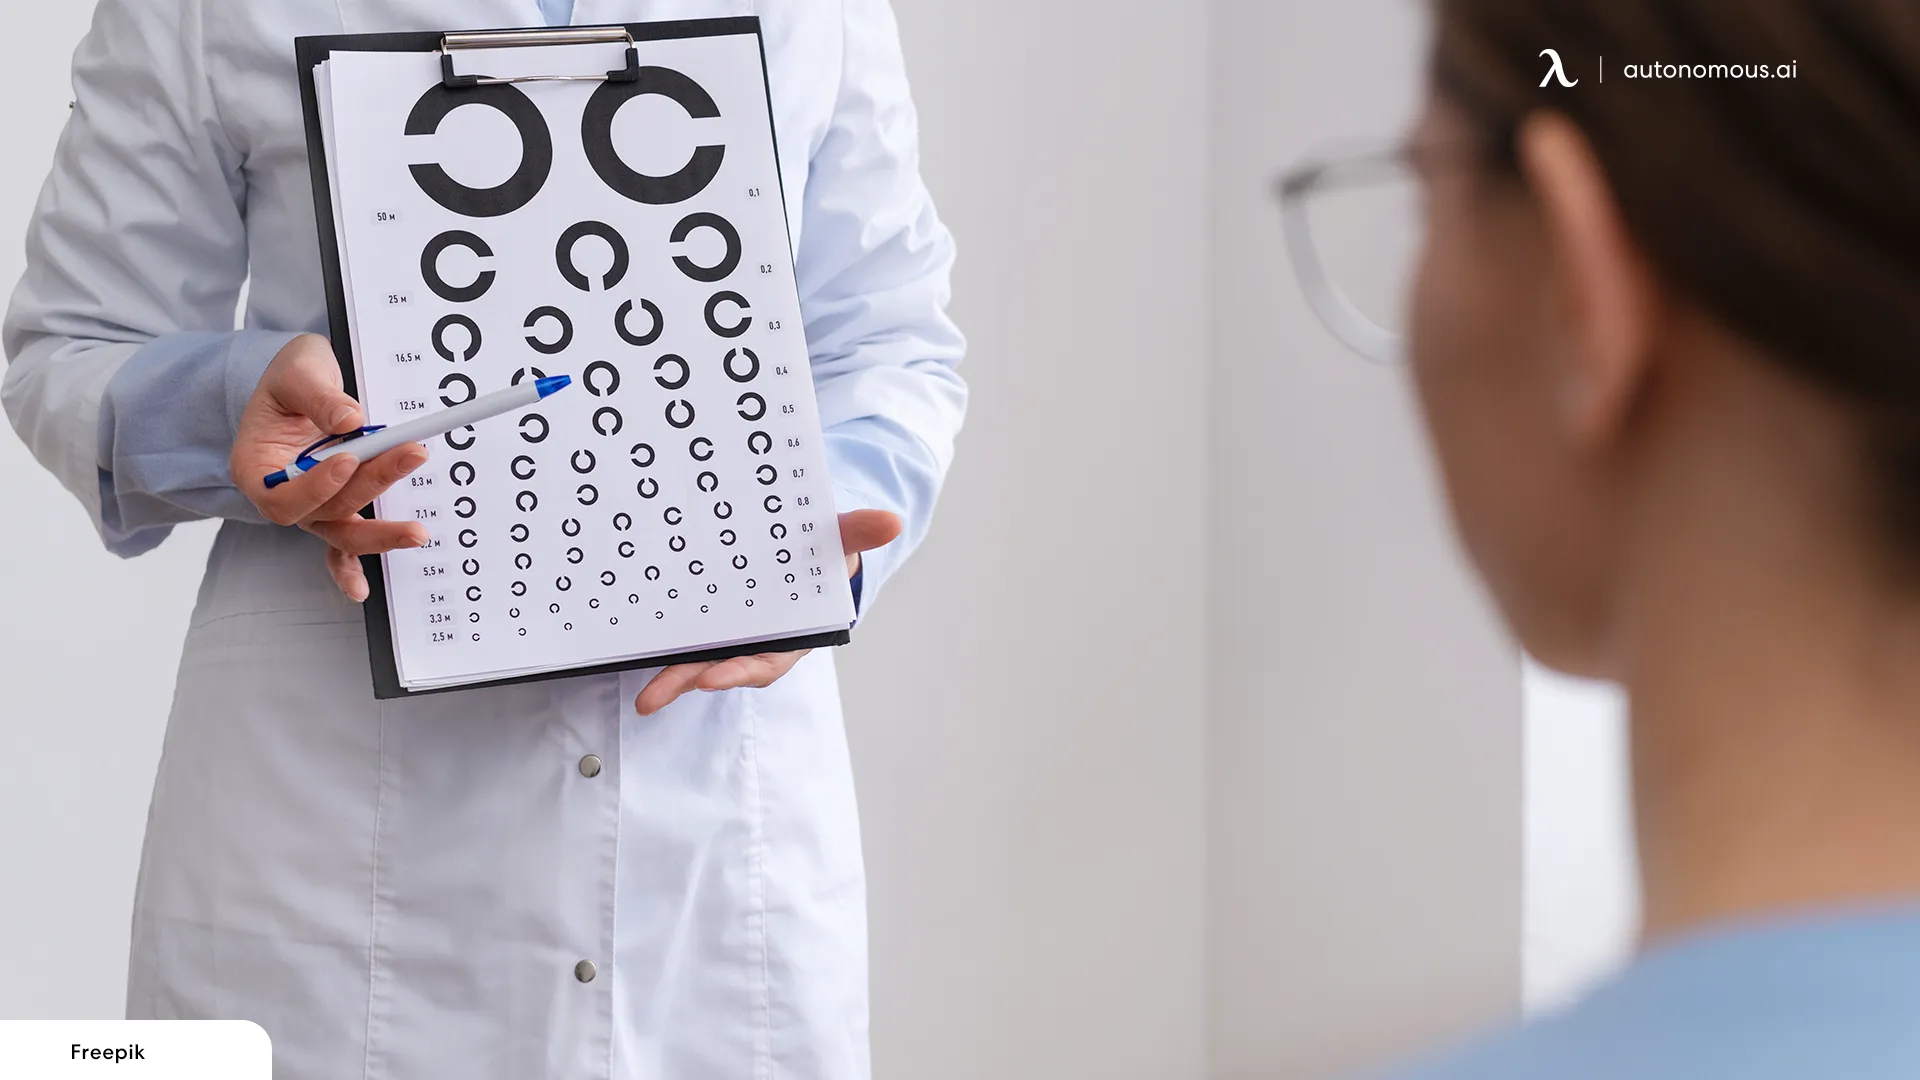 Consult your eye physician and get a comprehensive eye exam